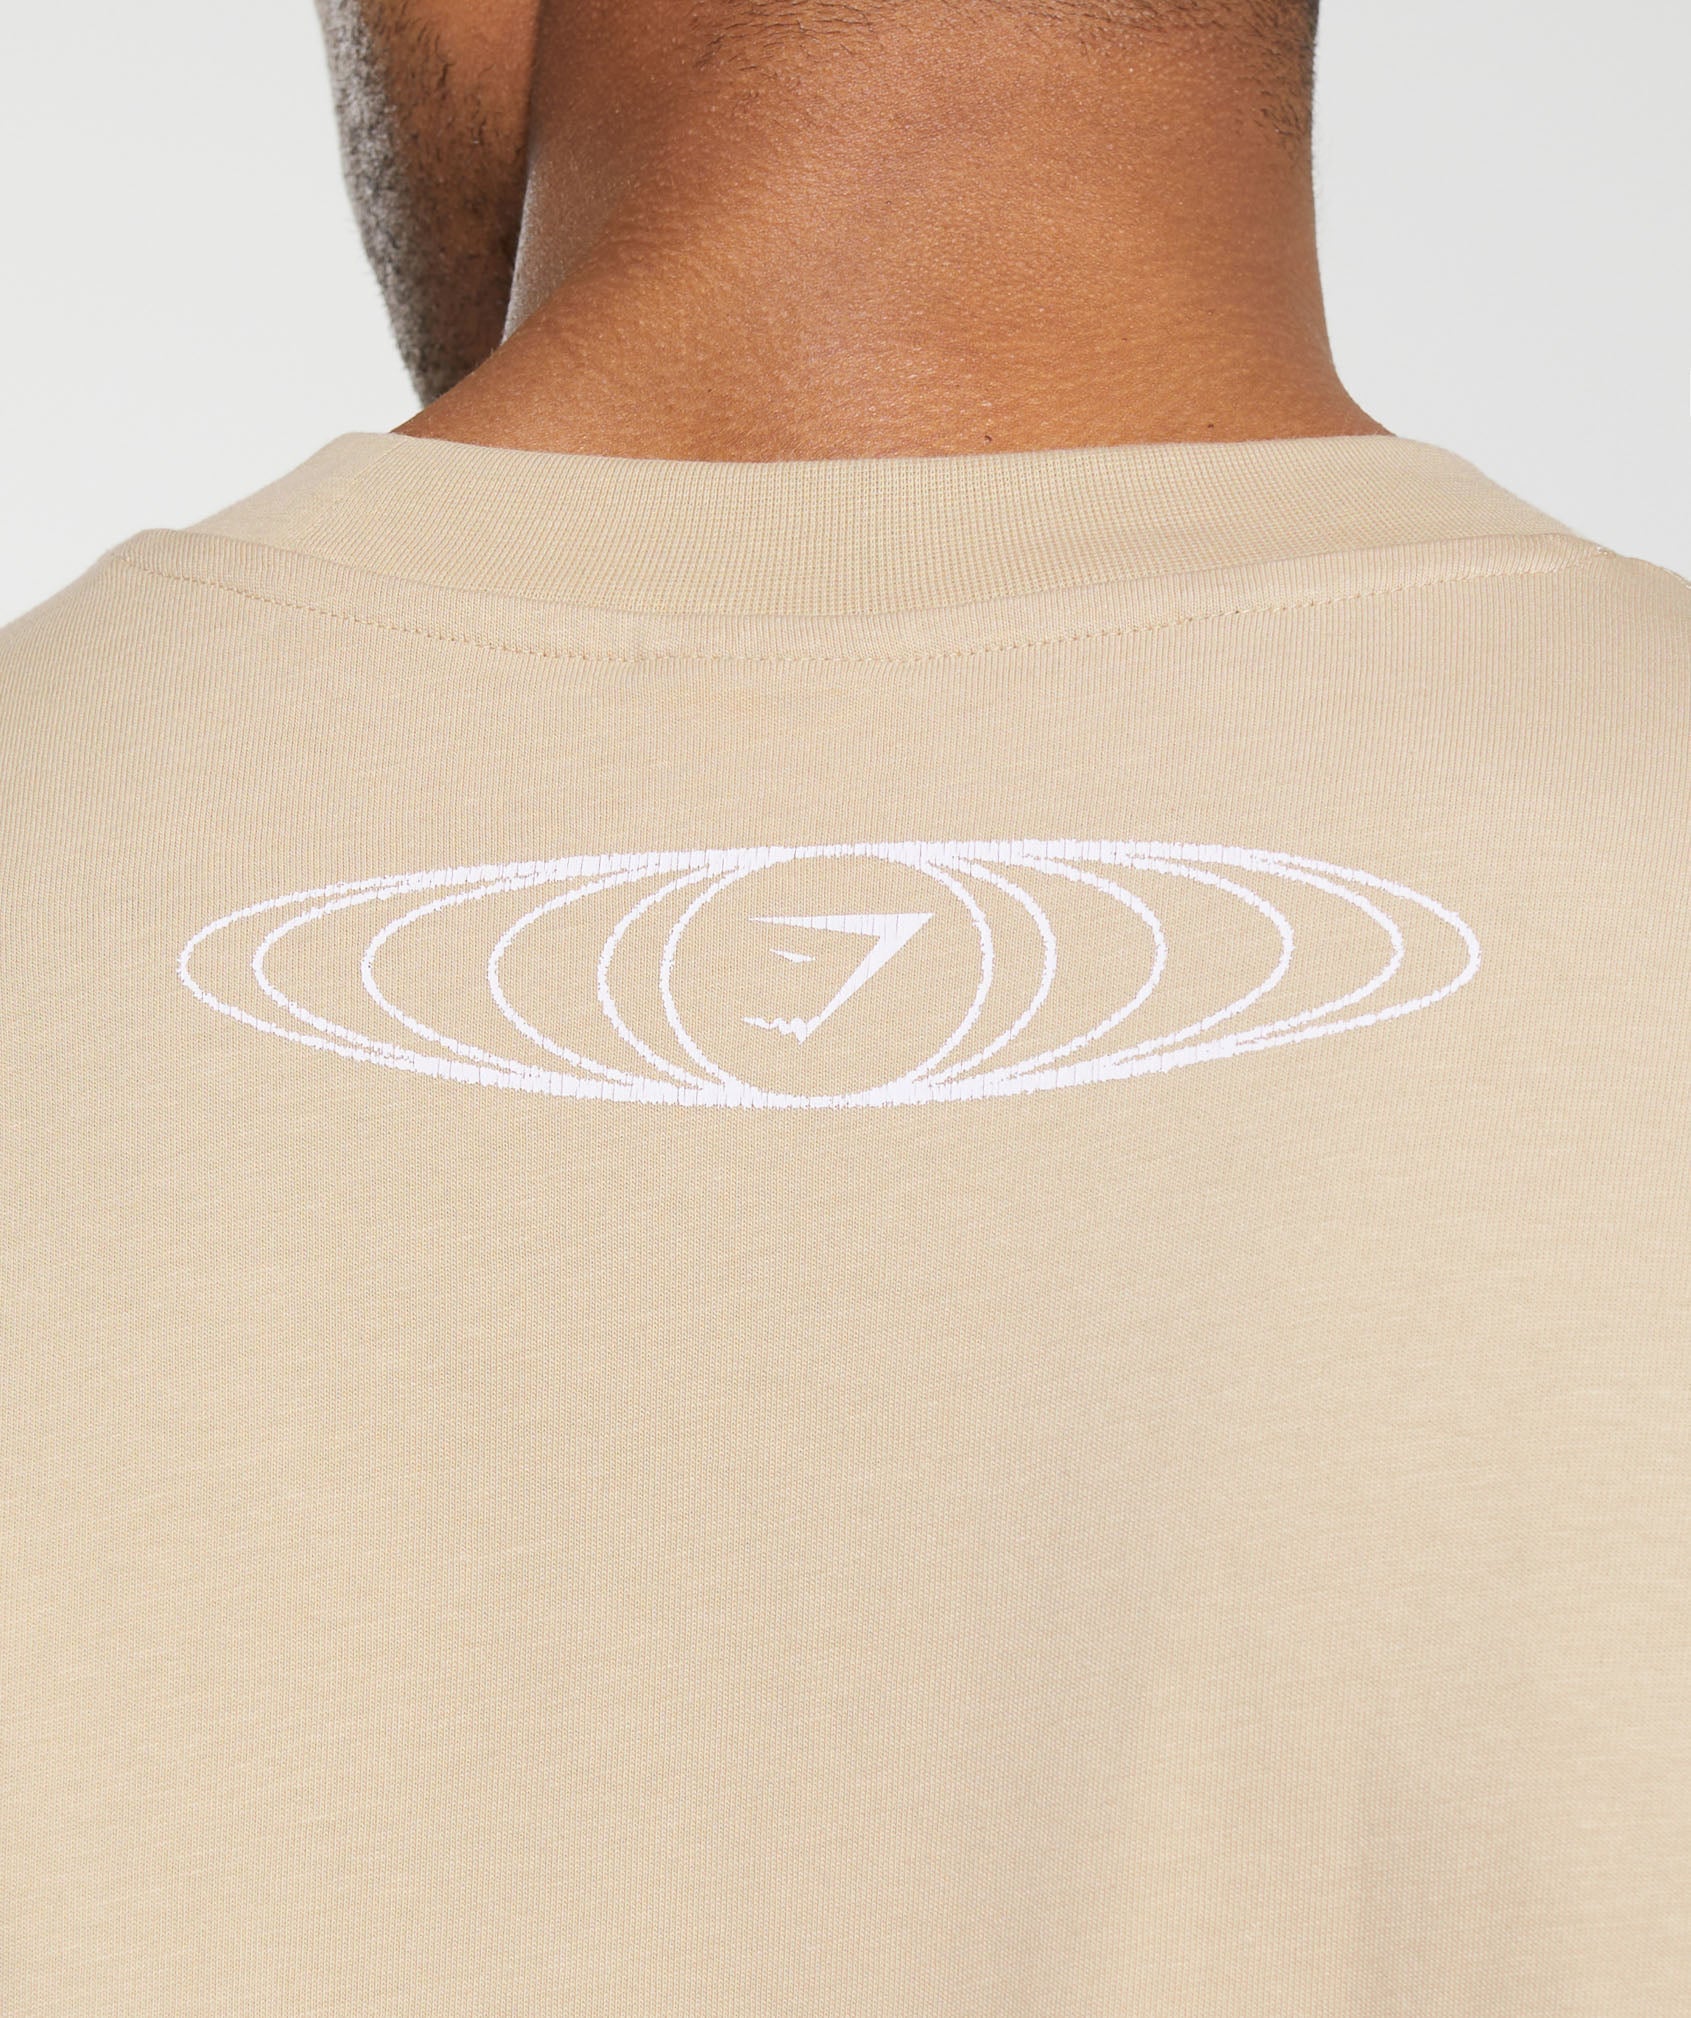 Masters of Our Craft Long Sleeve T-Shirt in Vanilla Beige - view 5